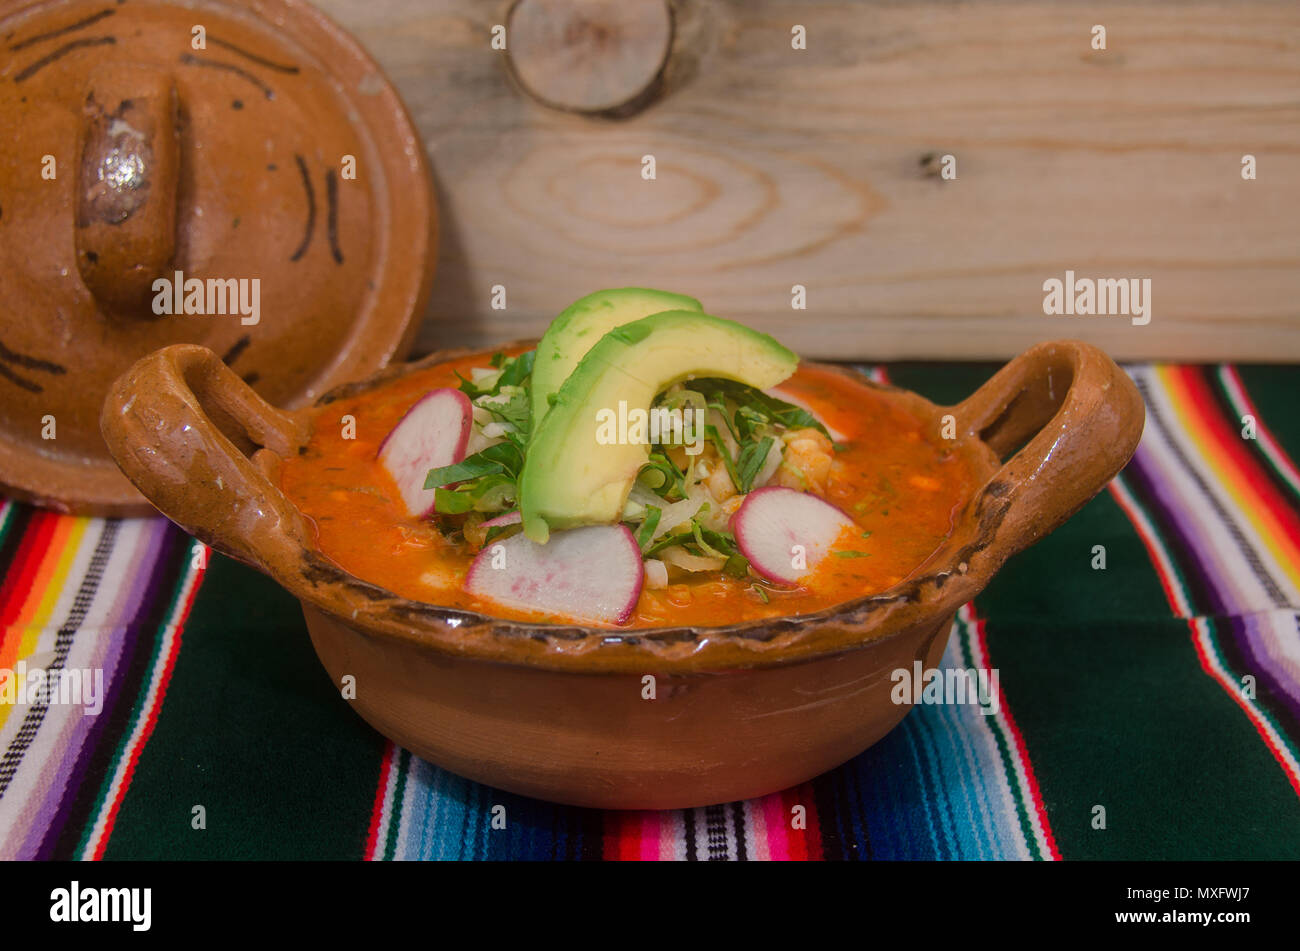 https://c8.alamy.com/comp/MXFWJ7/typical-mexican-antojito-served-in-a-clay-dish-MXFWJ7.jpg